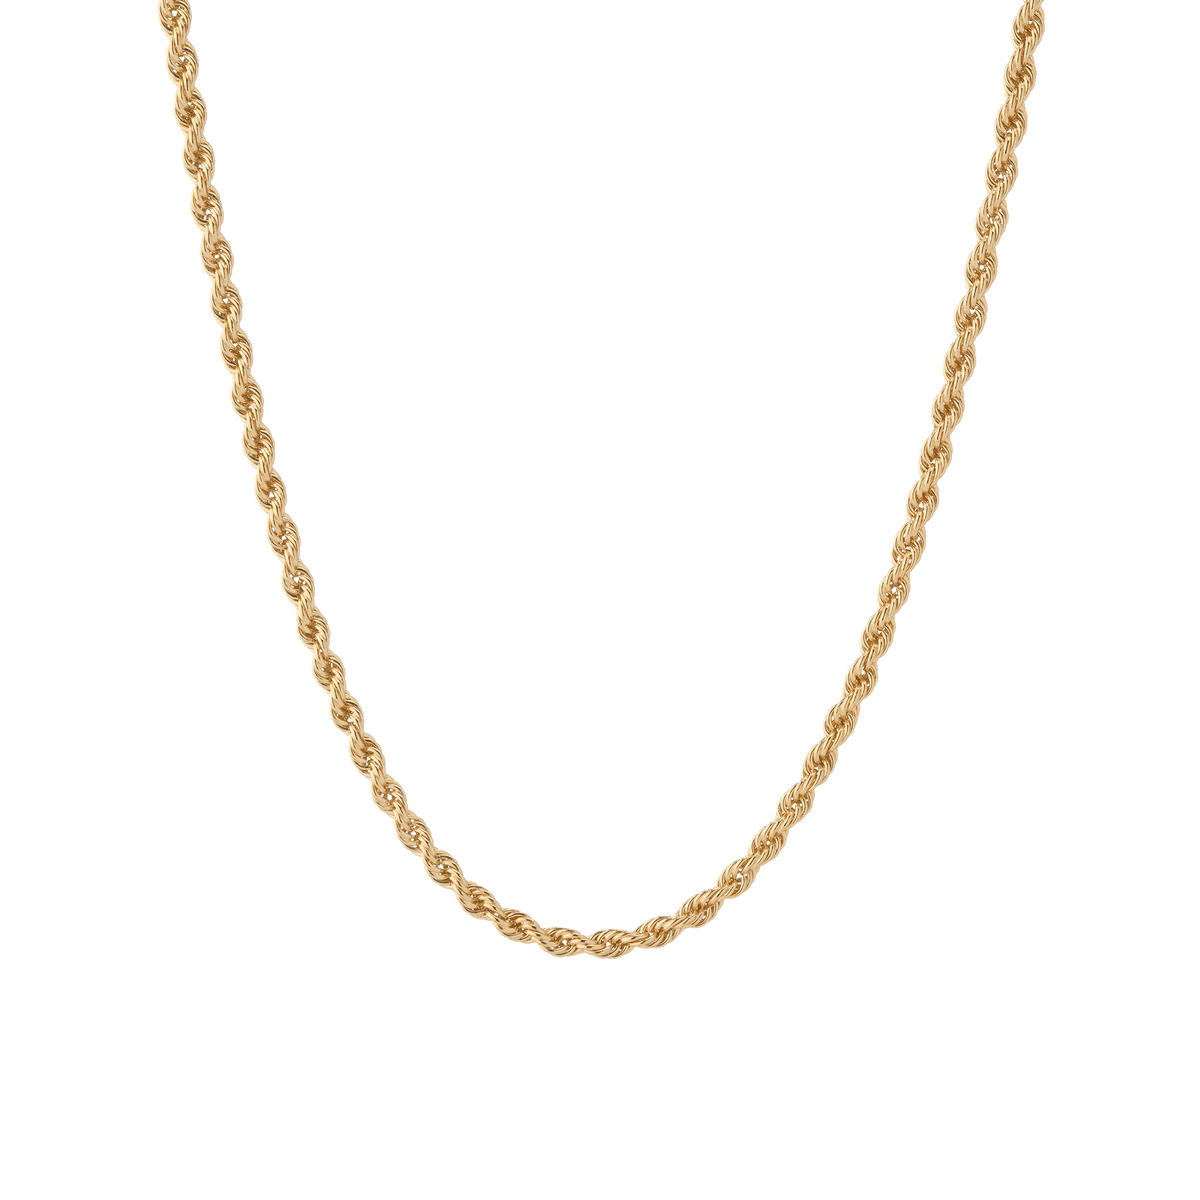 Gold Rope Chain Necklace in Yellow, Rose or White Gold